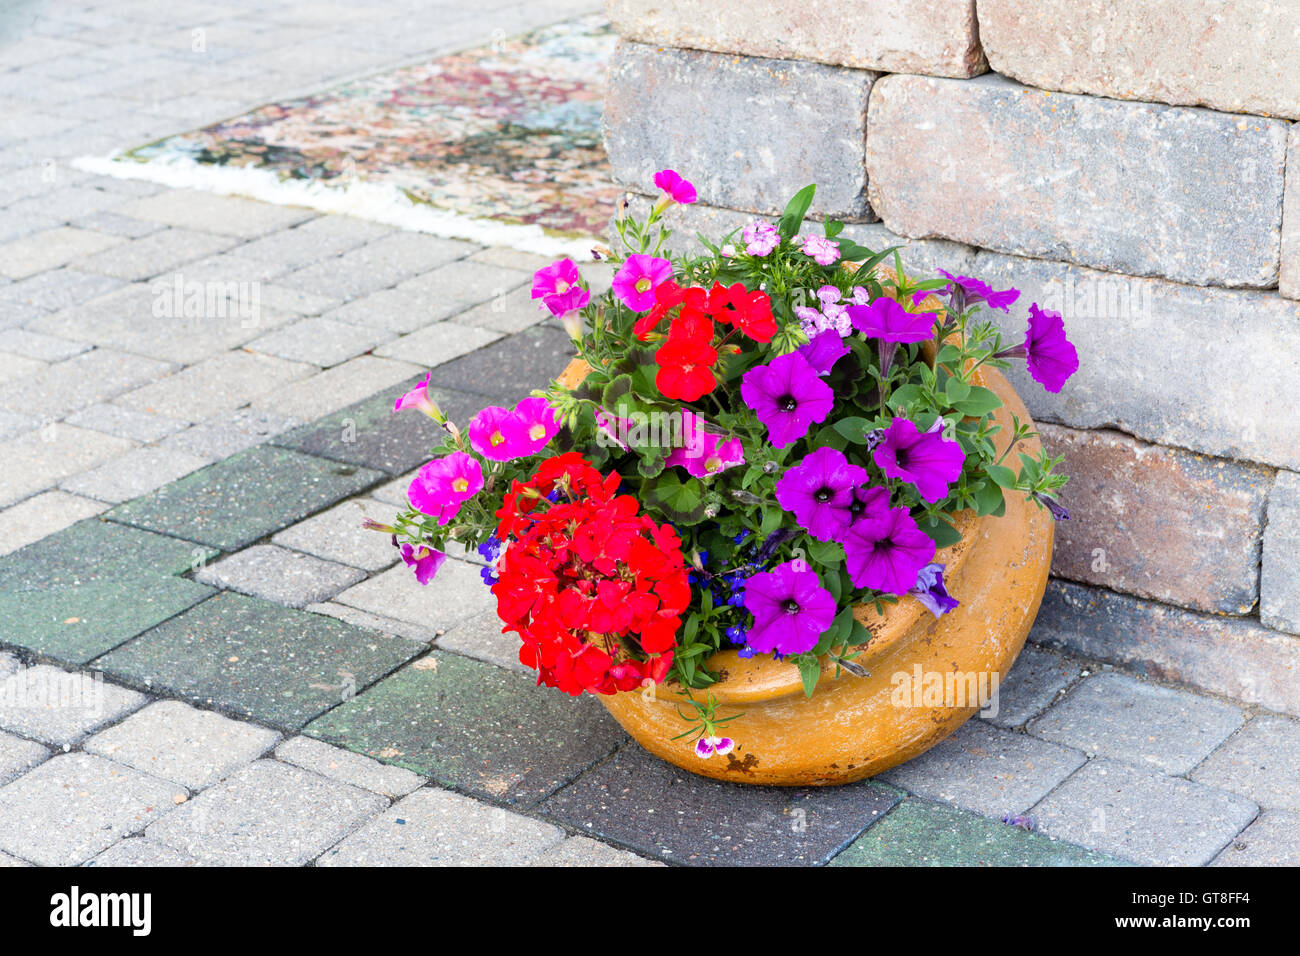 Ornamental display of colorful flowers in a tilted terracotta flowerpot standing at te edge of a building on a brick paved patio Stock Photo